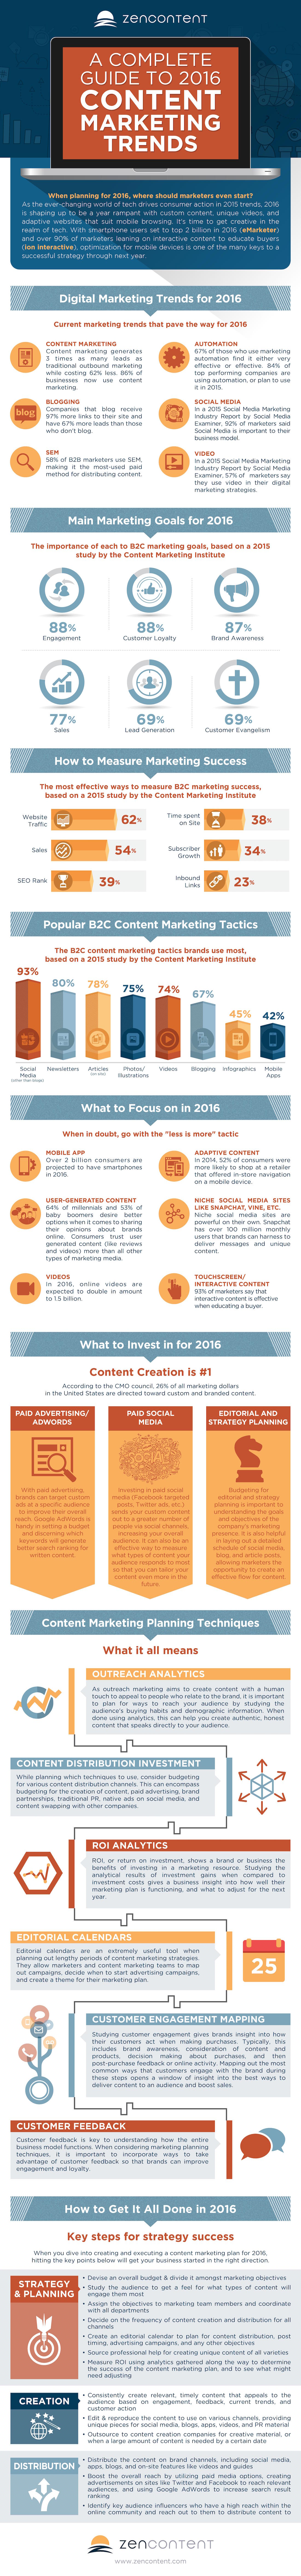 Complete Guide To 2016 Content Marketing [Infographic]